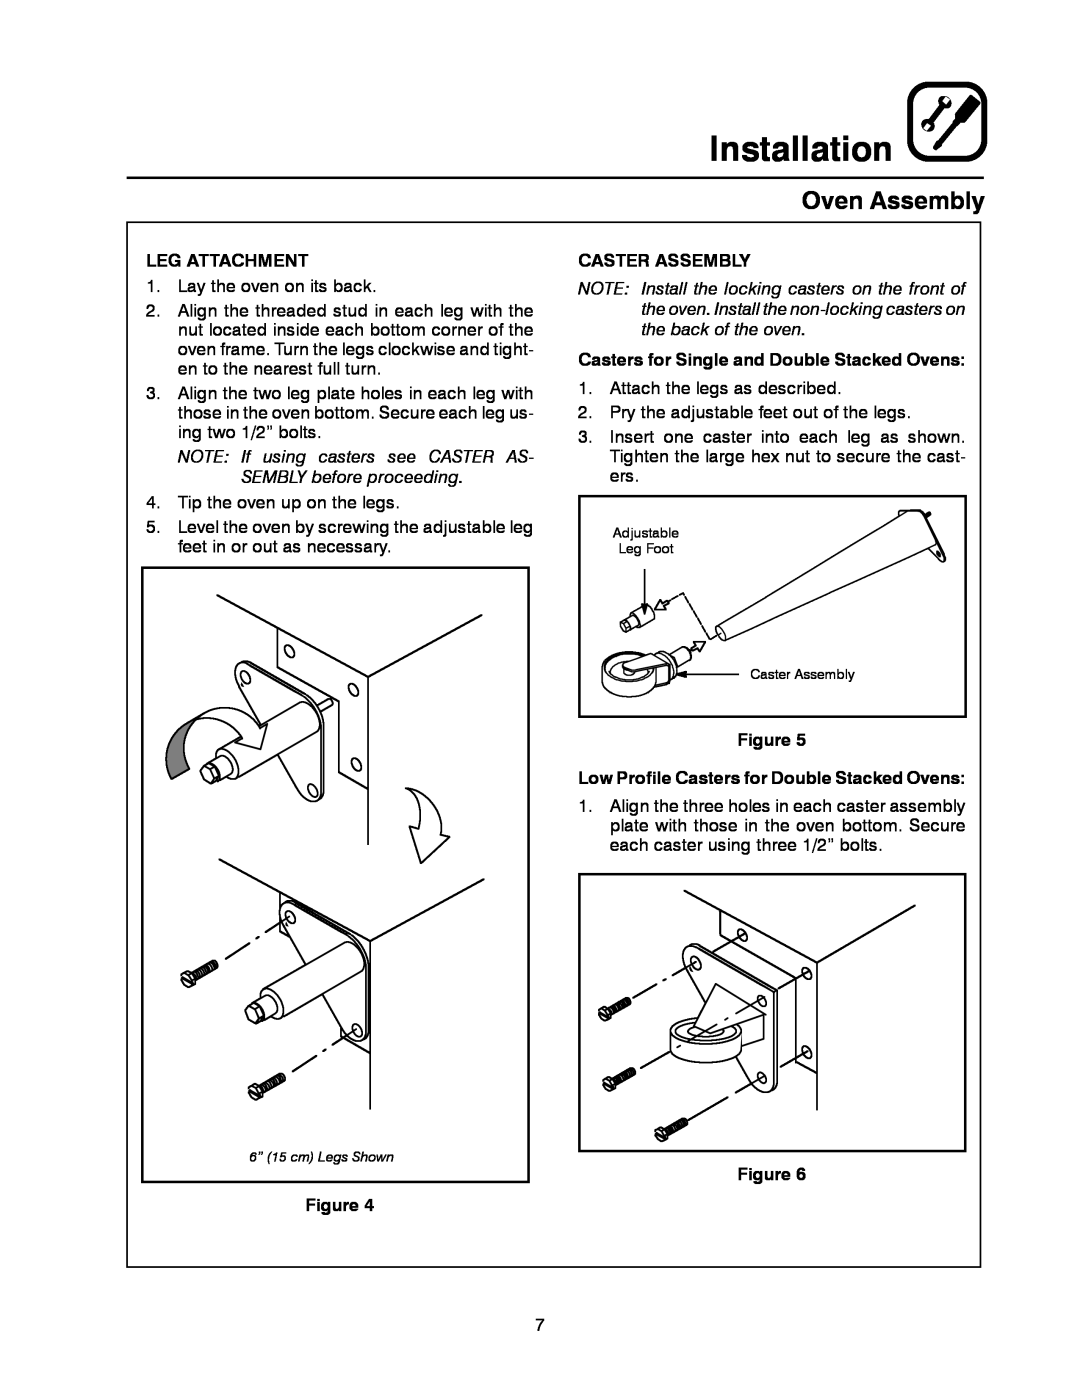 Blodgett ZEPHAIRE-E manual Installation, Leg Attachment, NOTE If using casters see CASTER AS- SEMBLY before proceeding 